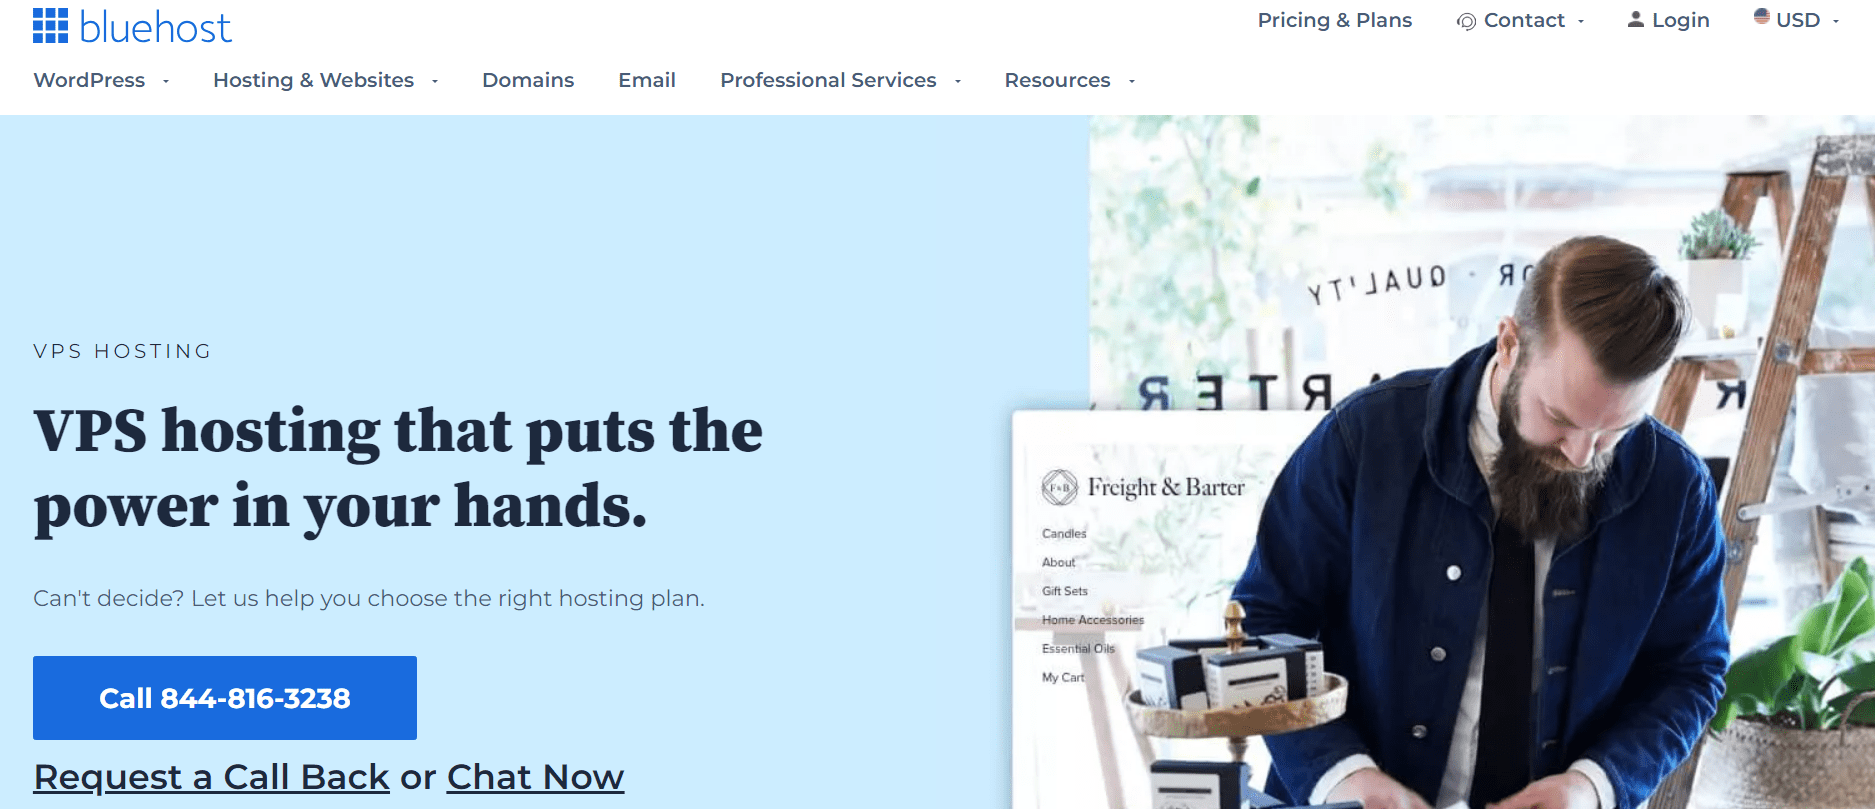 Bluehost landing page